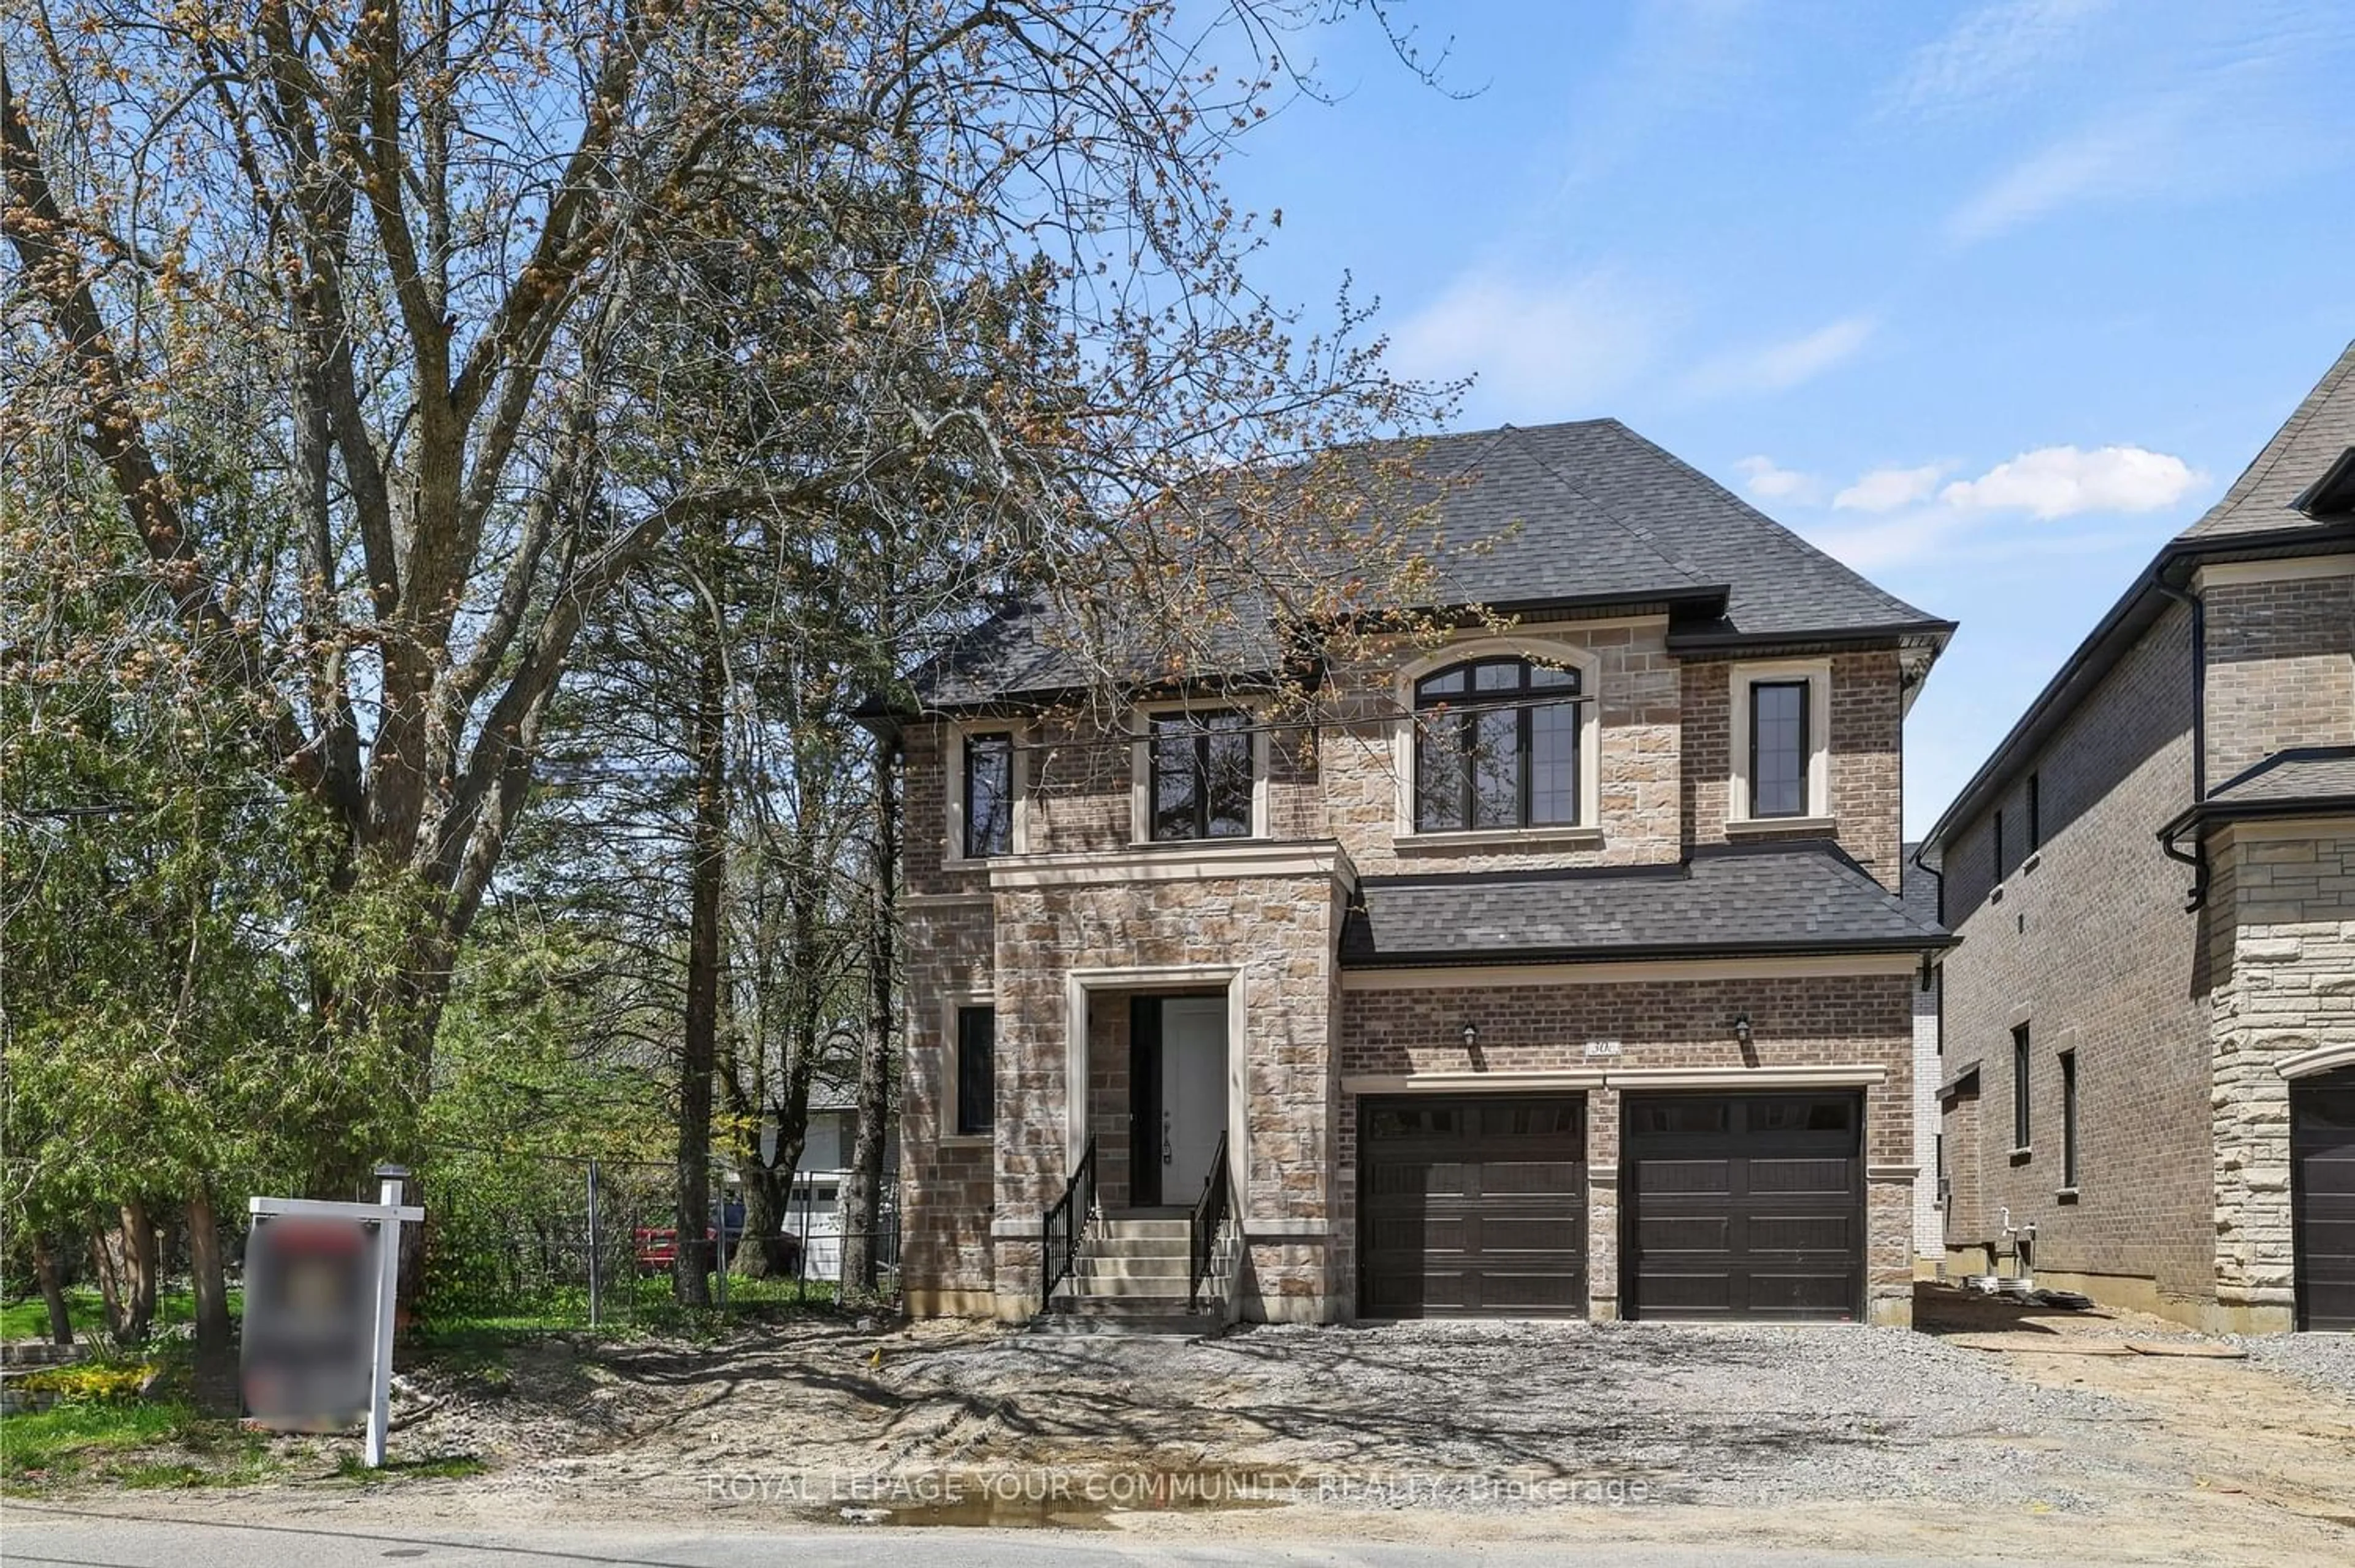 Home with brick exterior material for 30C Maple Grove Ave, Richmond Hill Ontario L4E 2T8